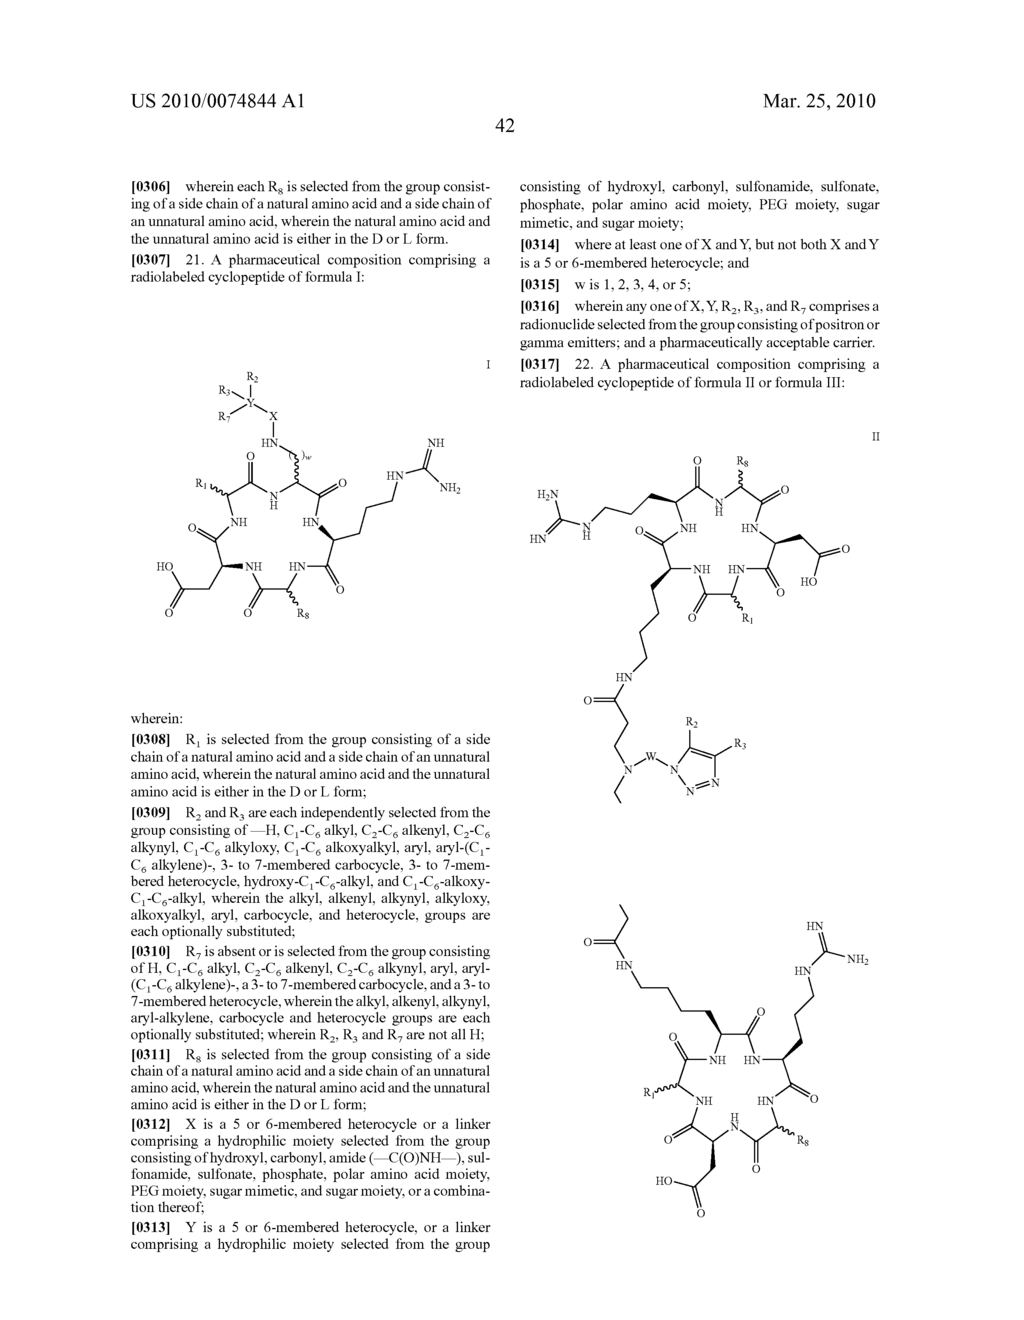 Cyclopeptides Containing RGD Mimetics As Imaging Markers For Integrins - diagram, schematic, and image 50